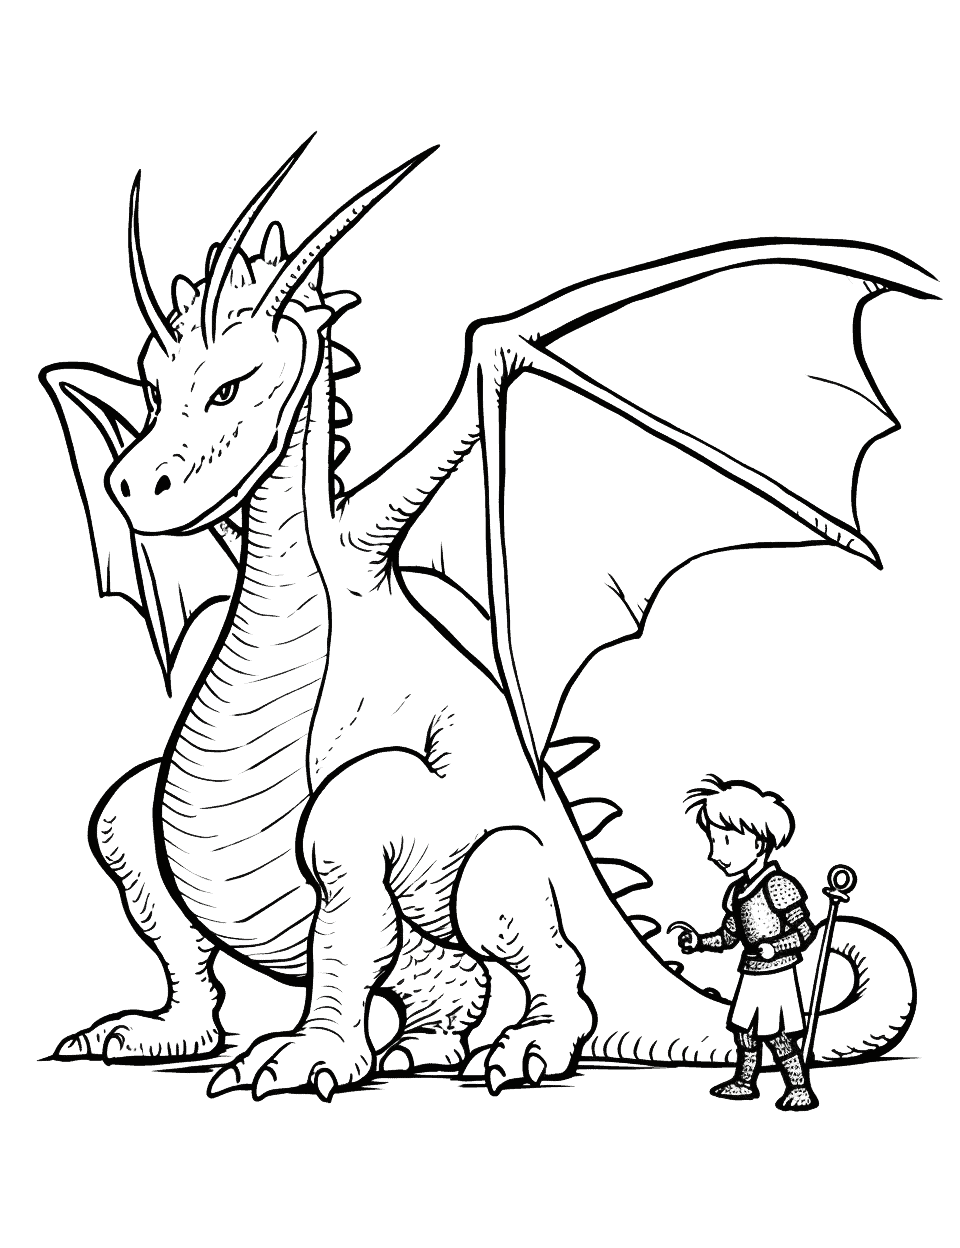 Dragon and Knight Coloring Page - A brave knight facing a fire-breathing dragon.